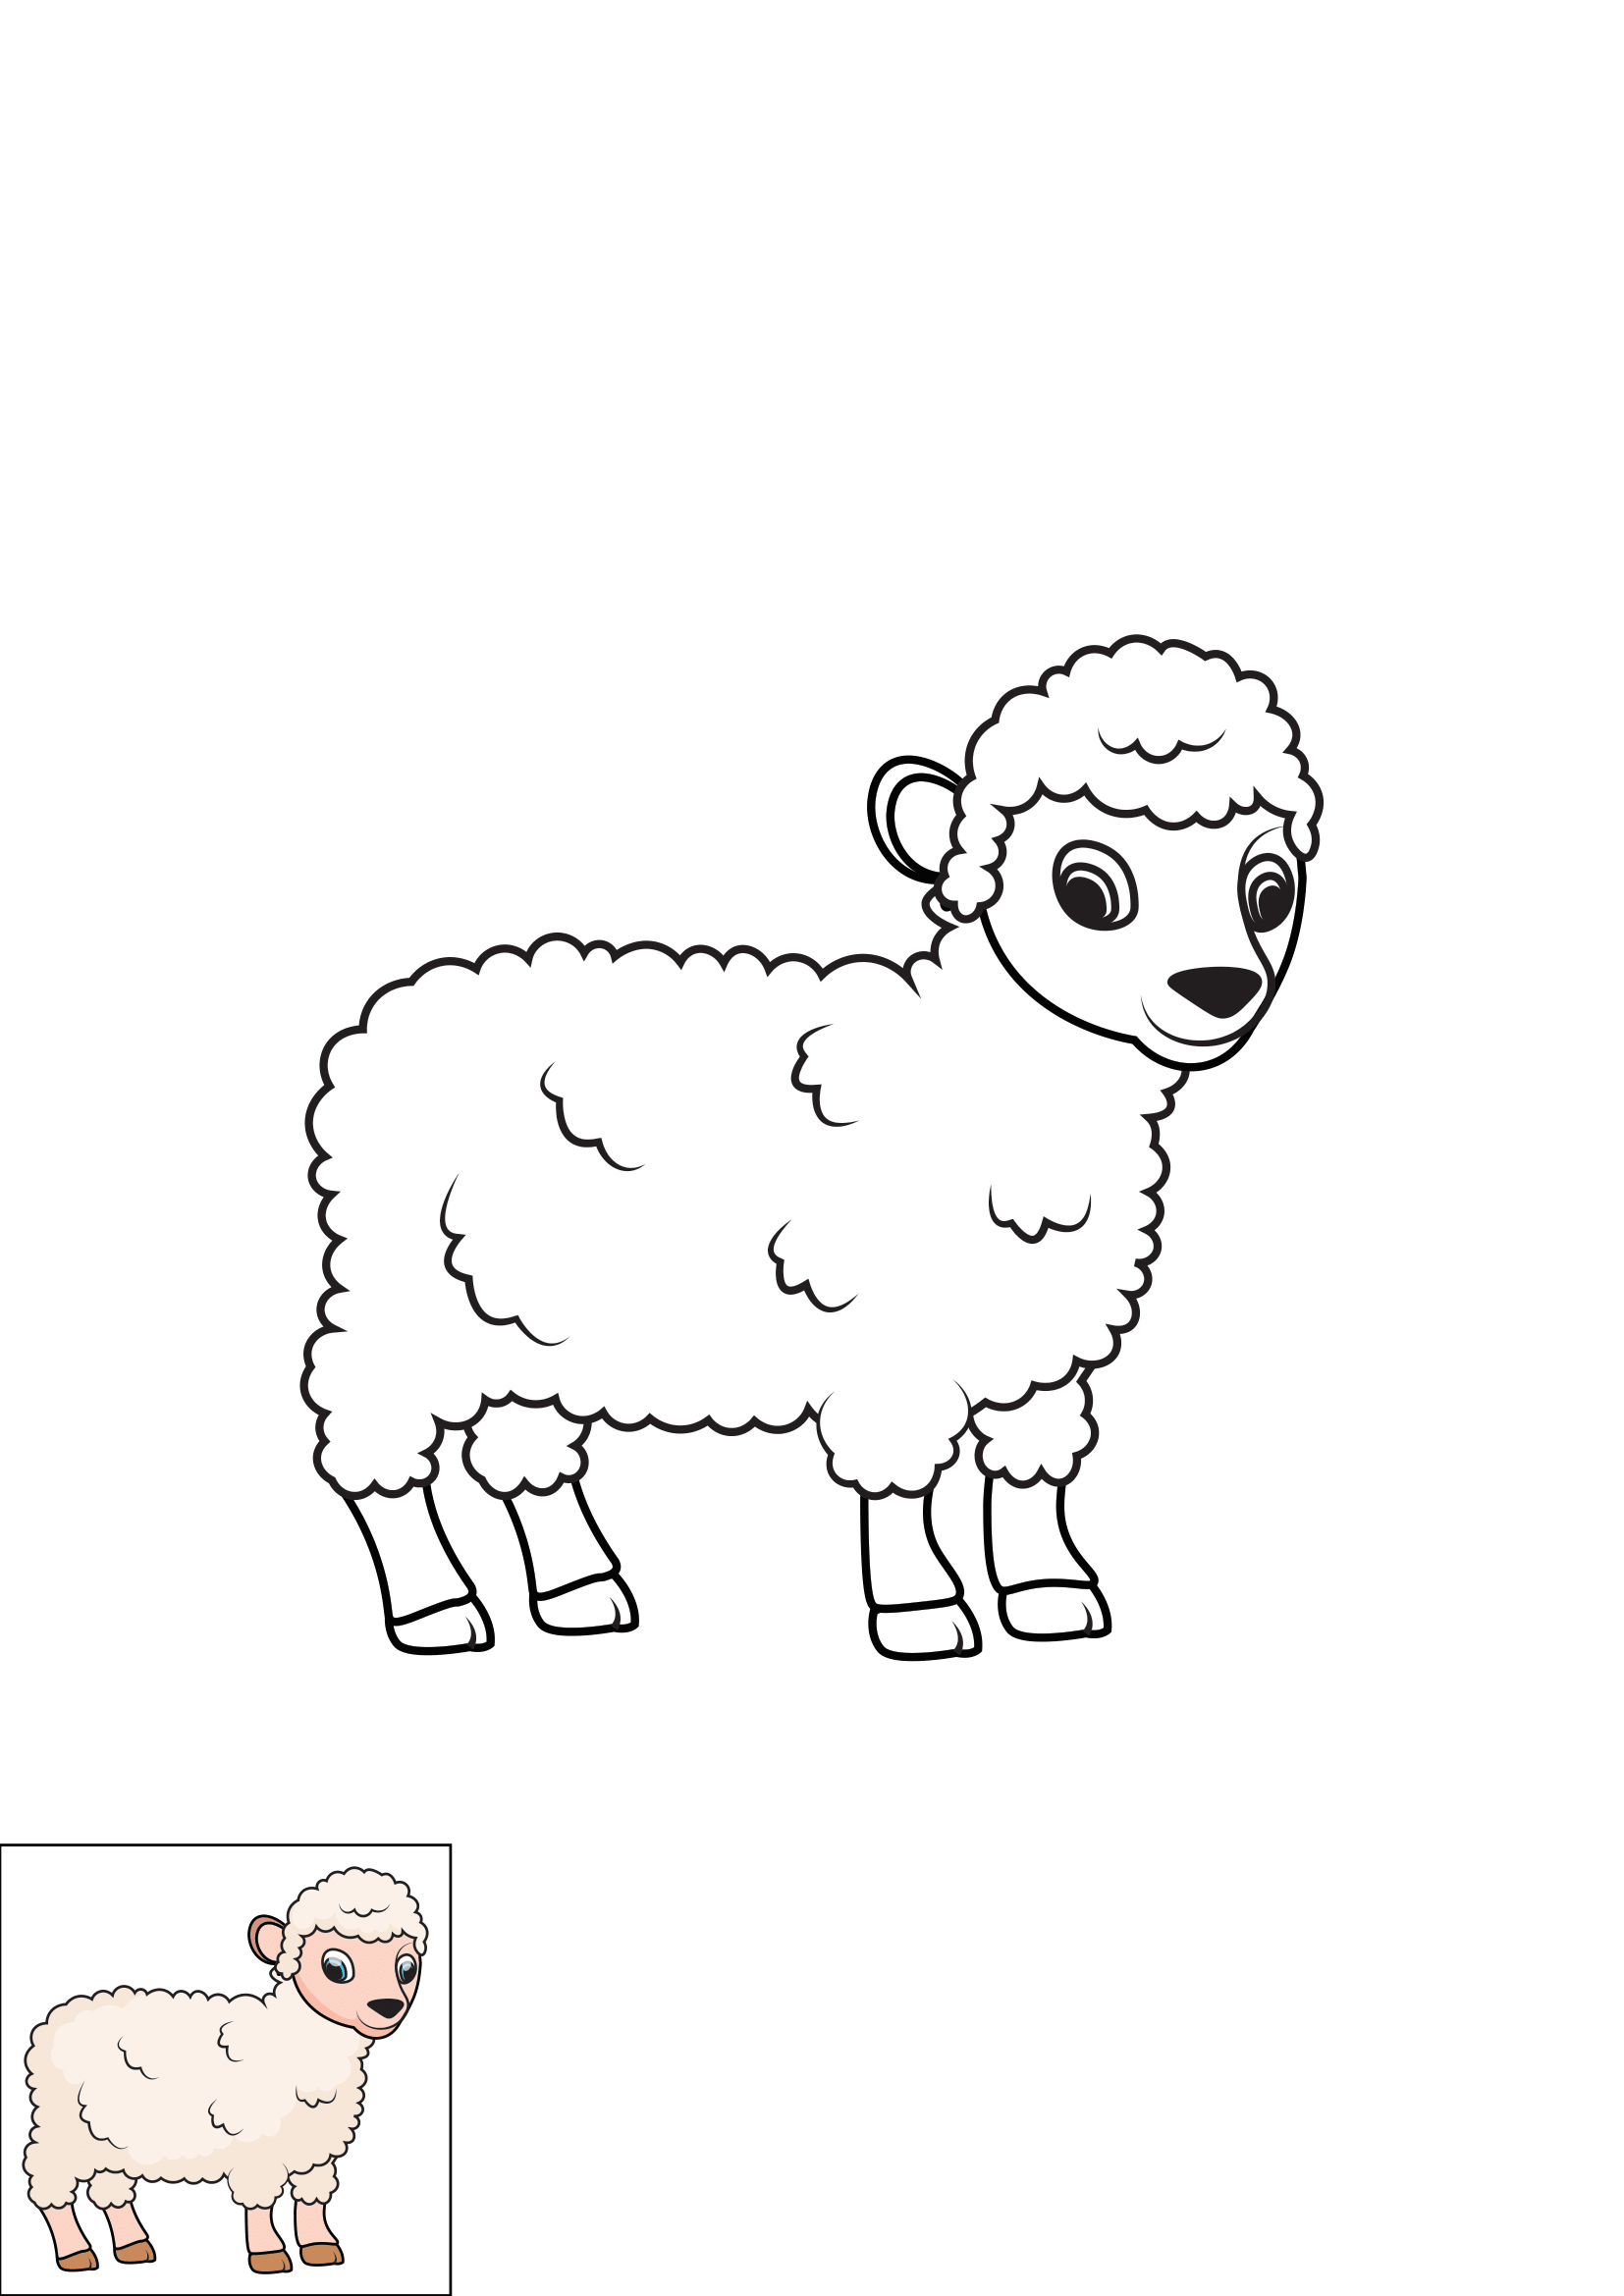 How to Draw A Lamb Step by Step Printable Color